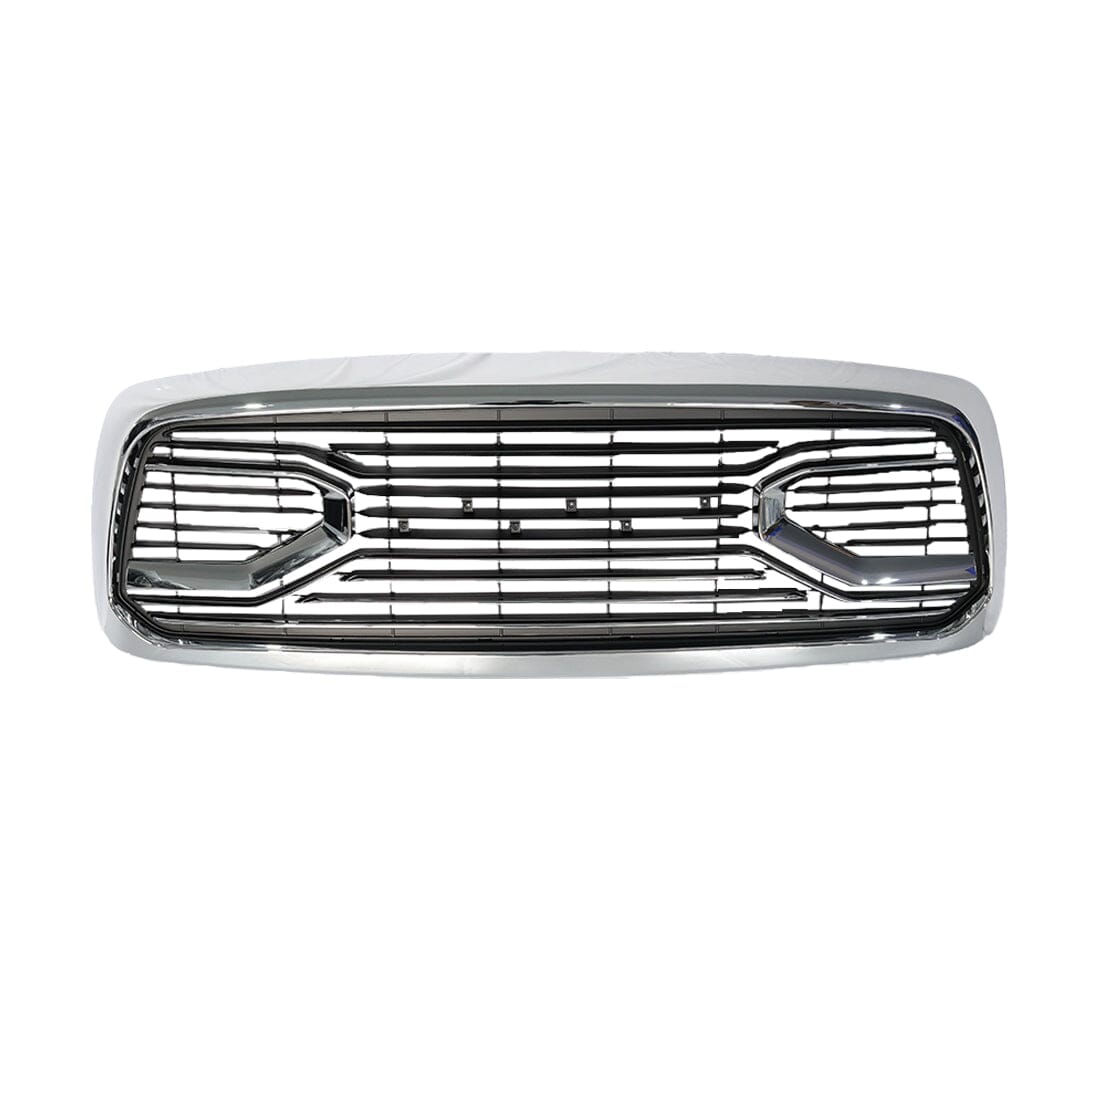 Chrome Big Horn Style Front Grille W/Amber For 2002-2005 Dodge Ram 1500| Amoffroad